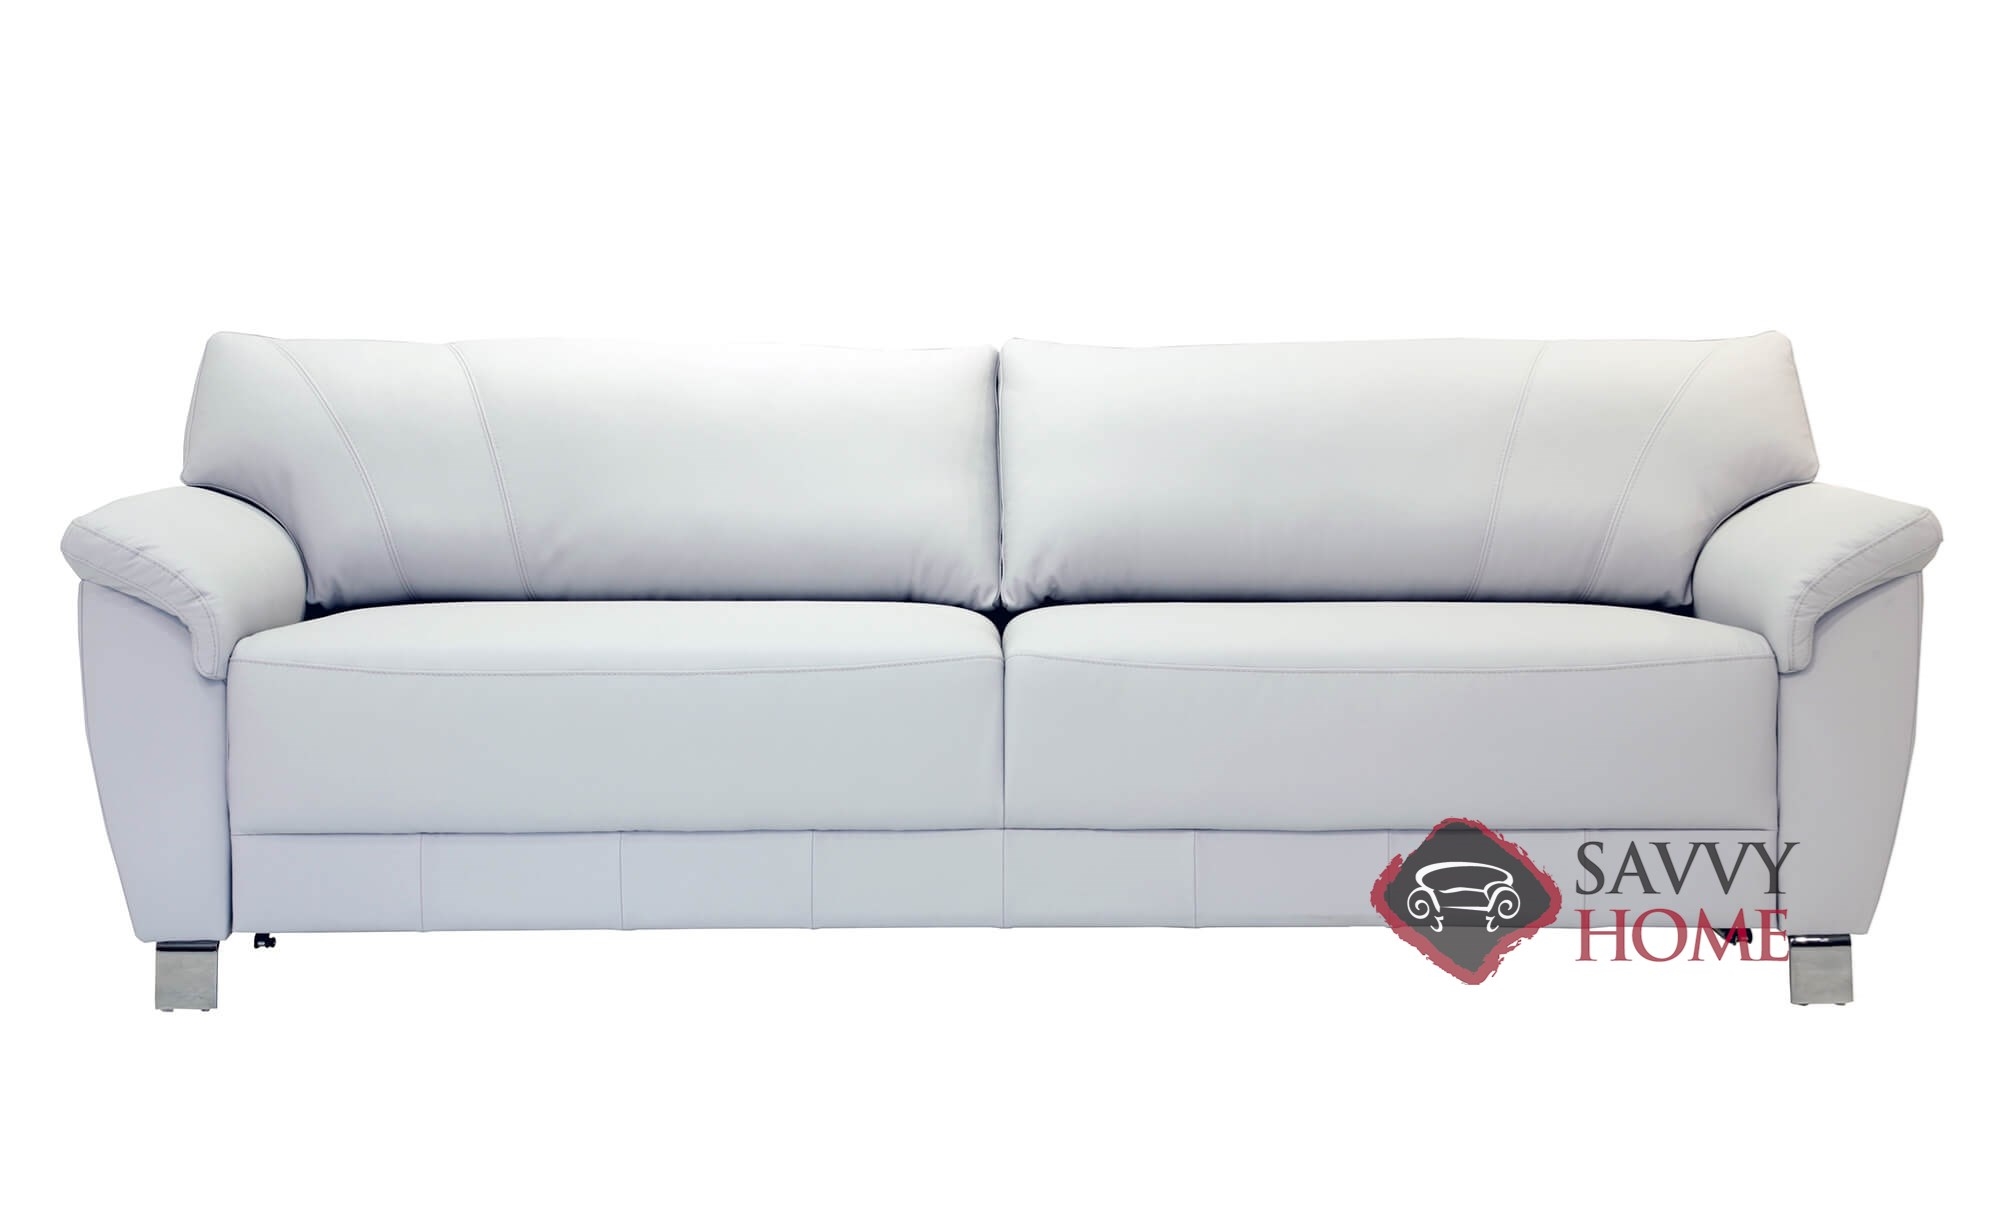 Grace By Luonto Leather Sleeper Sofas, Colorful Leather Sofas